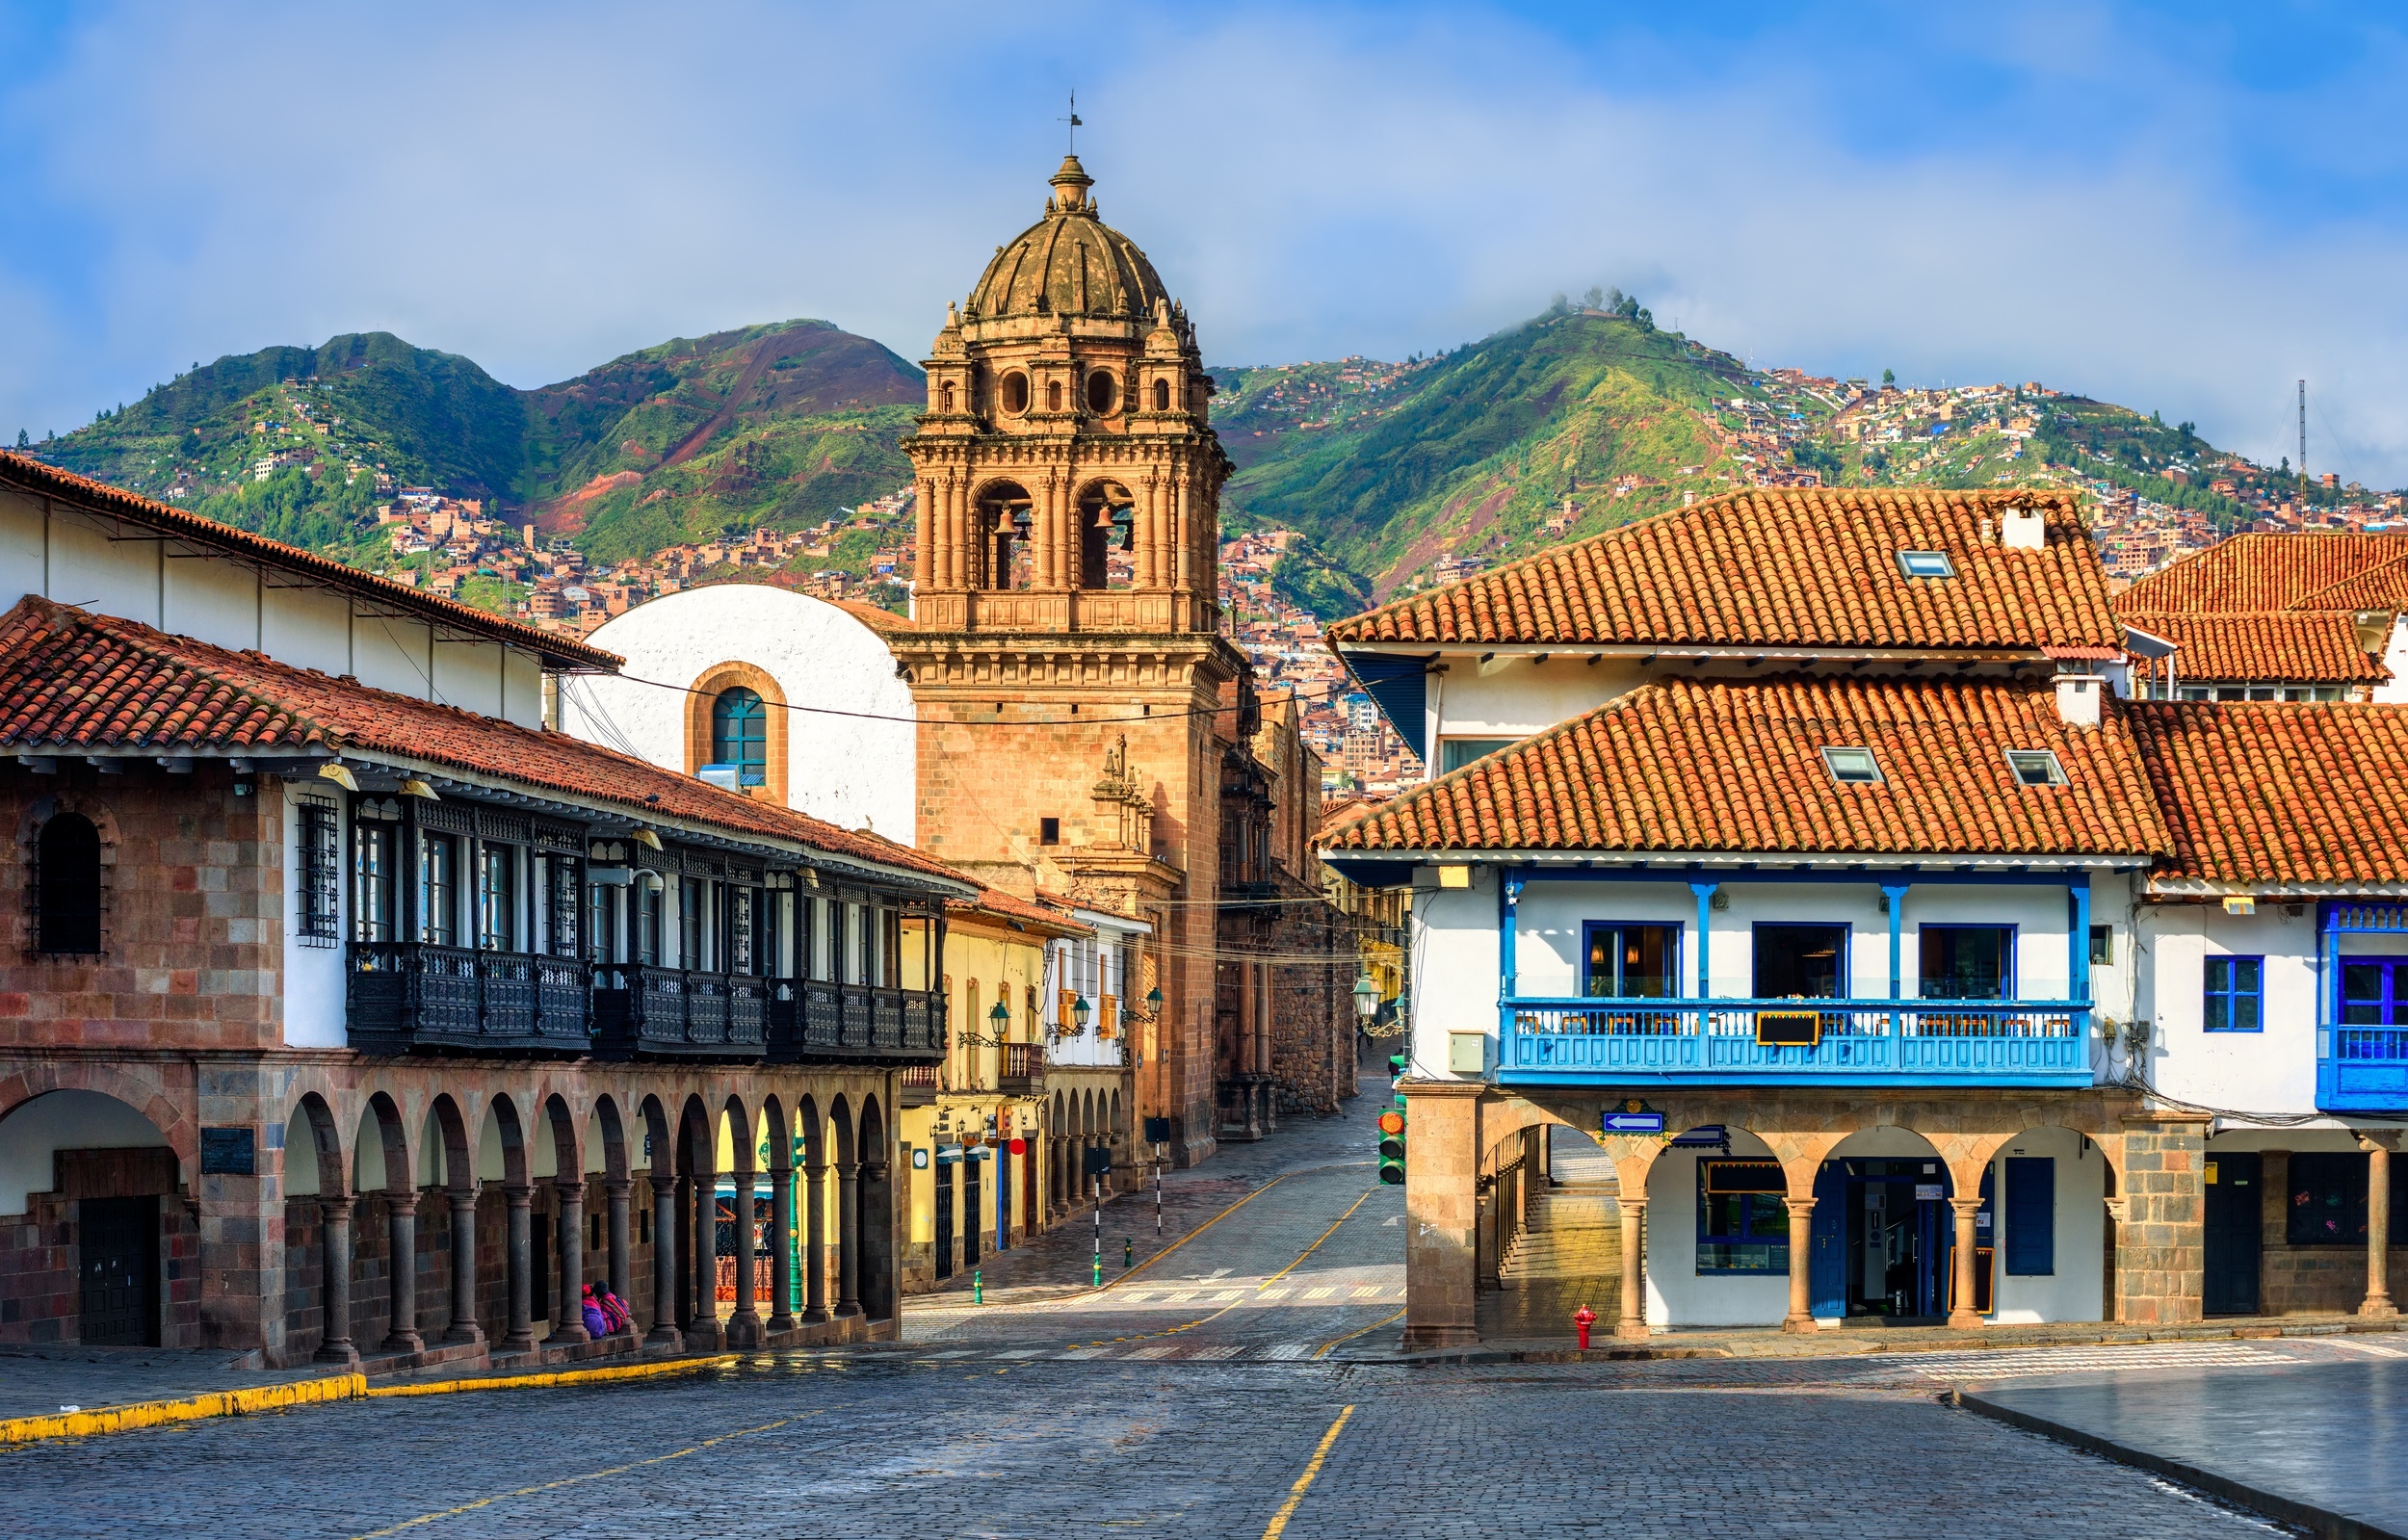 <p>A bit of a different idea: Cusco is mountainous and not exactly tropical. However, it will still be a lot warmer than most northern destinations and is perfect if you love to hike.</p><p><a href='https://www.msn.com/en-us/community/channel/vid-cj9pqbr0vn9in2b6ddcd8sfgpfq6x6utp44fssrv6mc2gtybw0us'>Follow us on MSN to see more of our exclusive lifestyle content.</a></p>